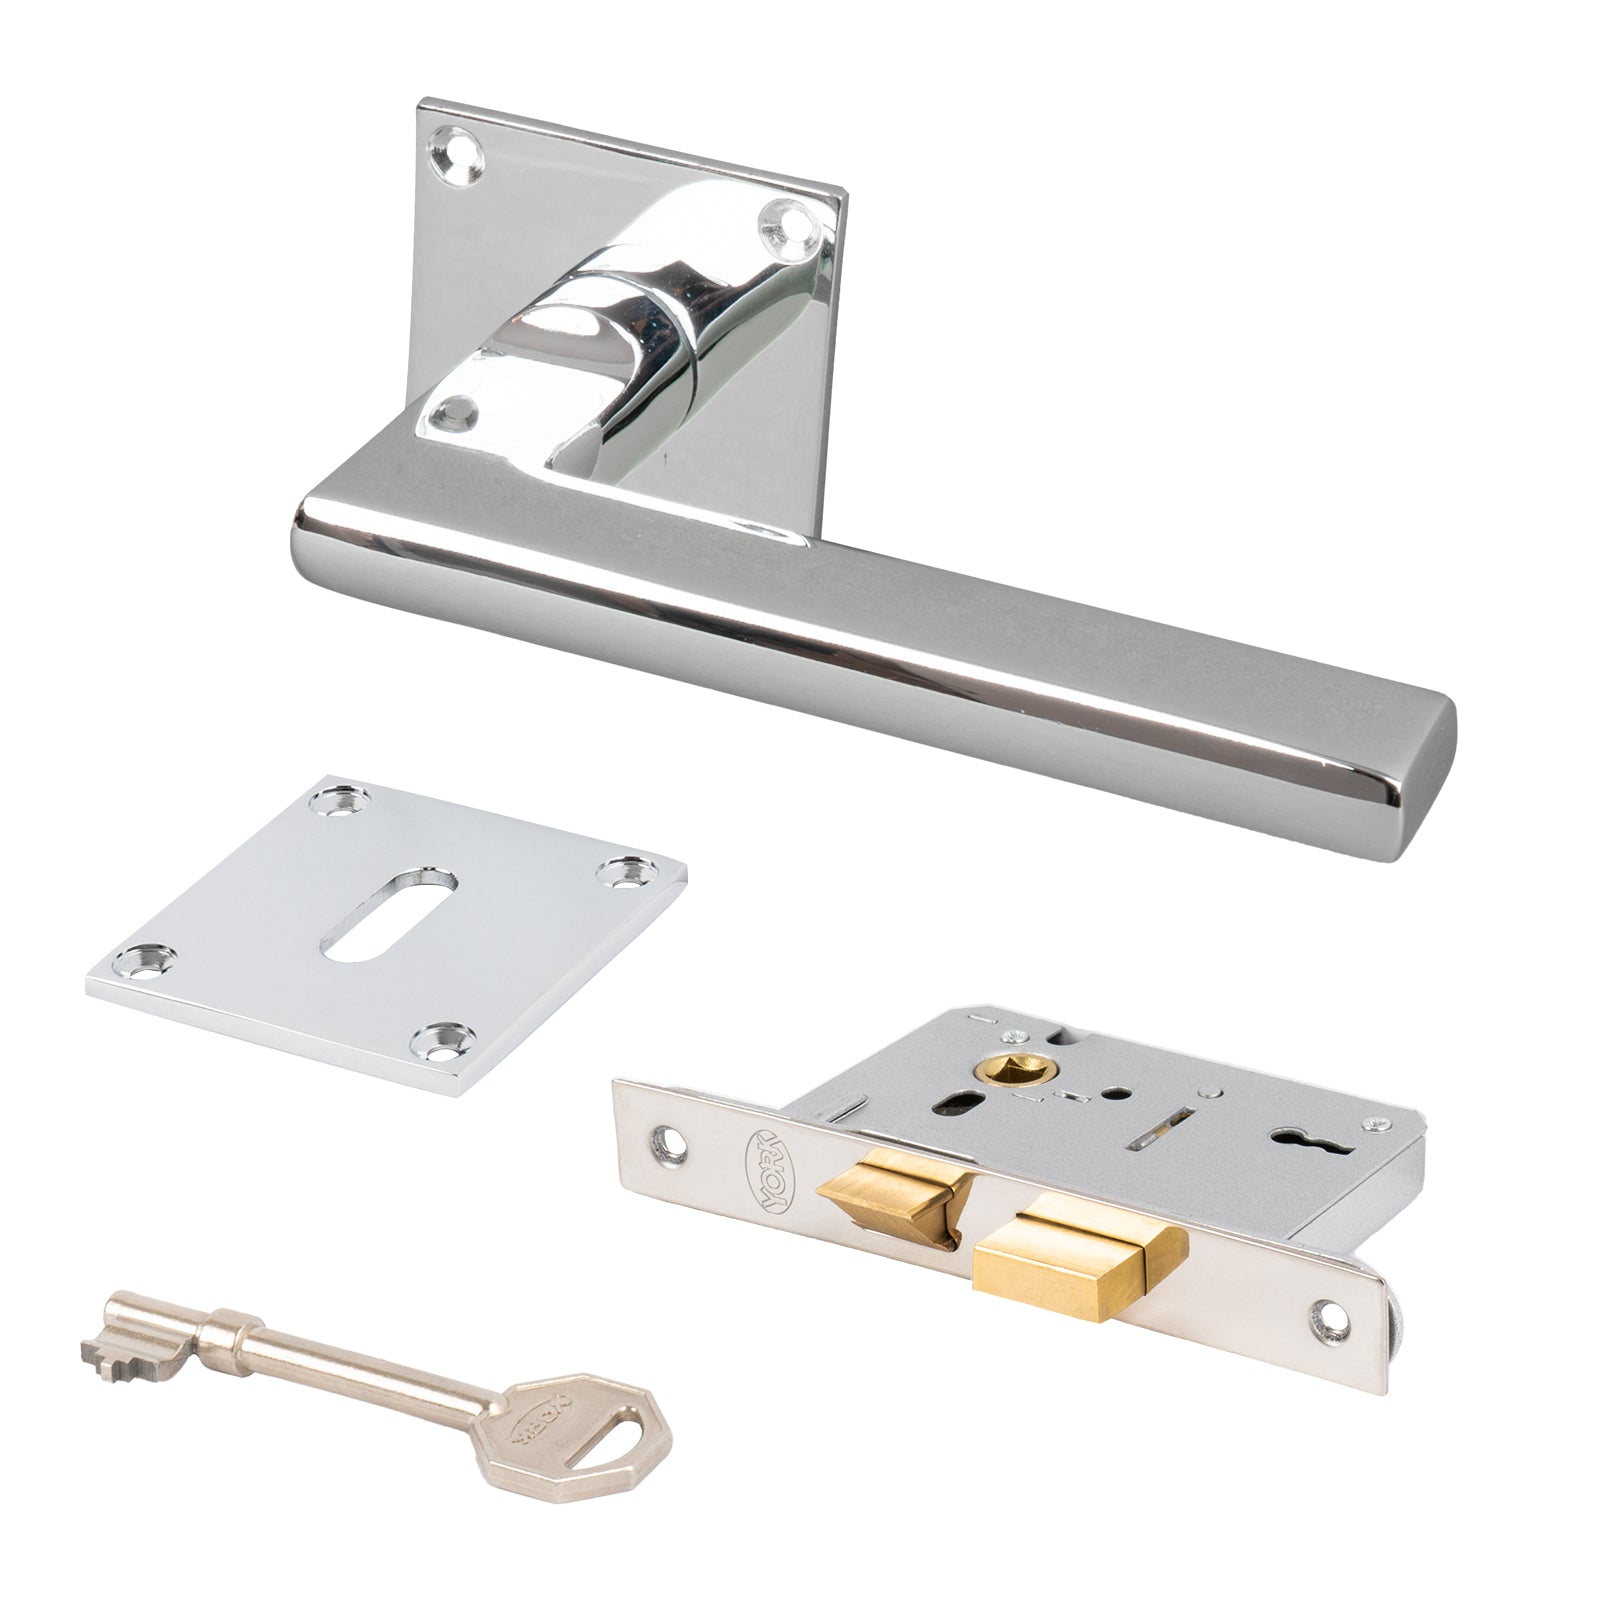 SHOW Trident Square Rose Door Handles 3 Lever Latch set with Polished Chrome finish